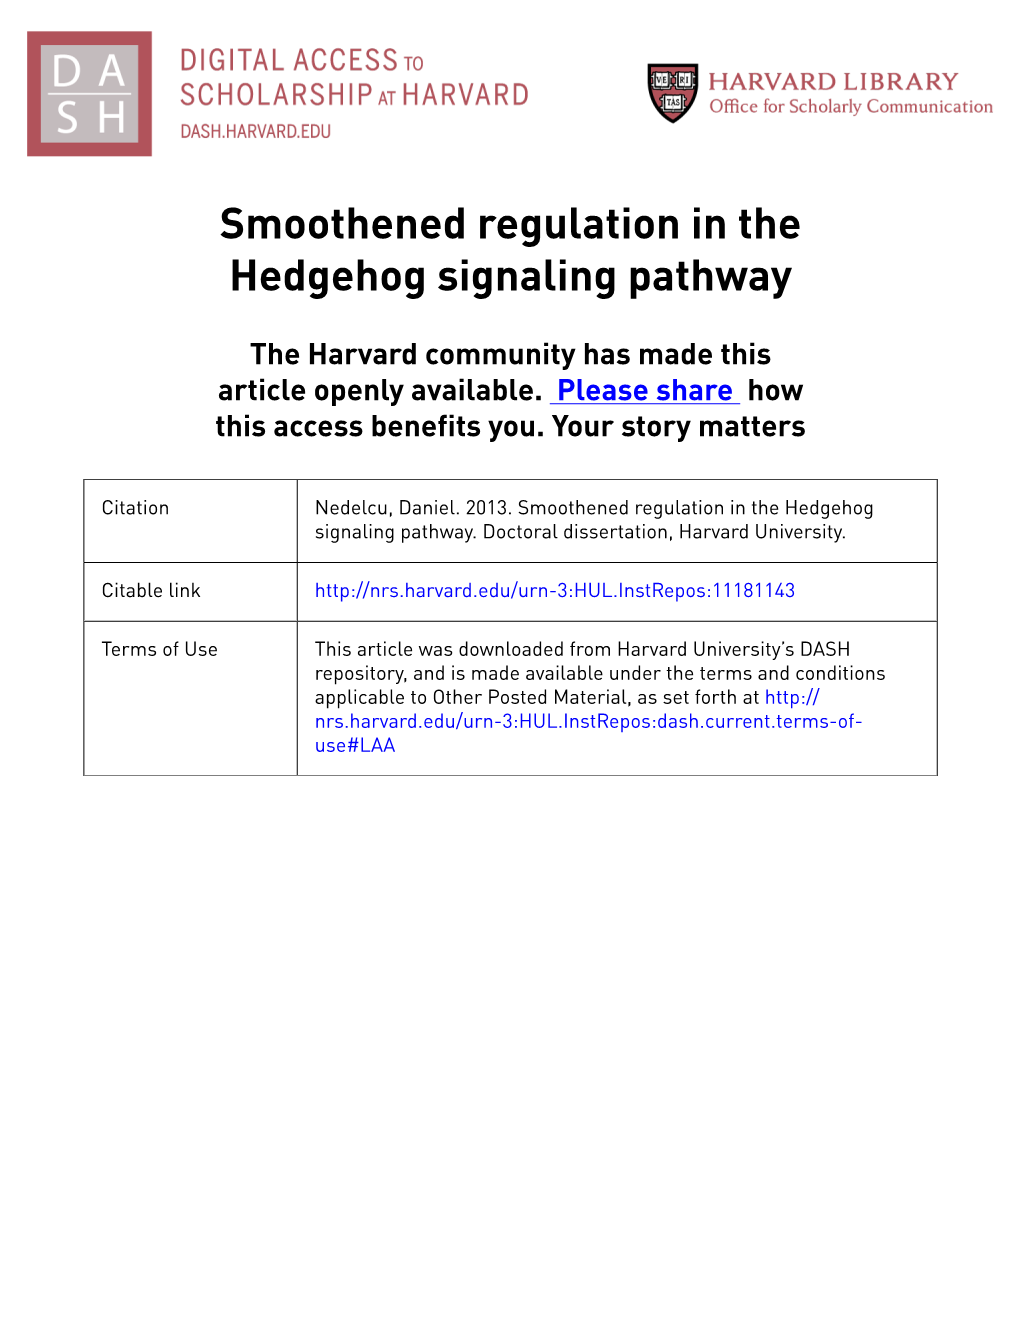 Smoothened Regulation in the Hedgehog Signaling Pathway